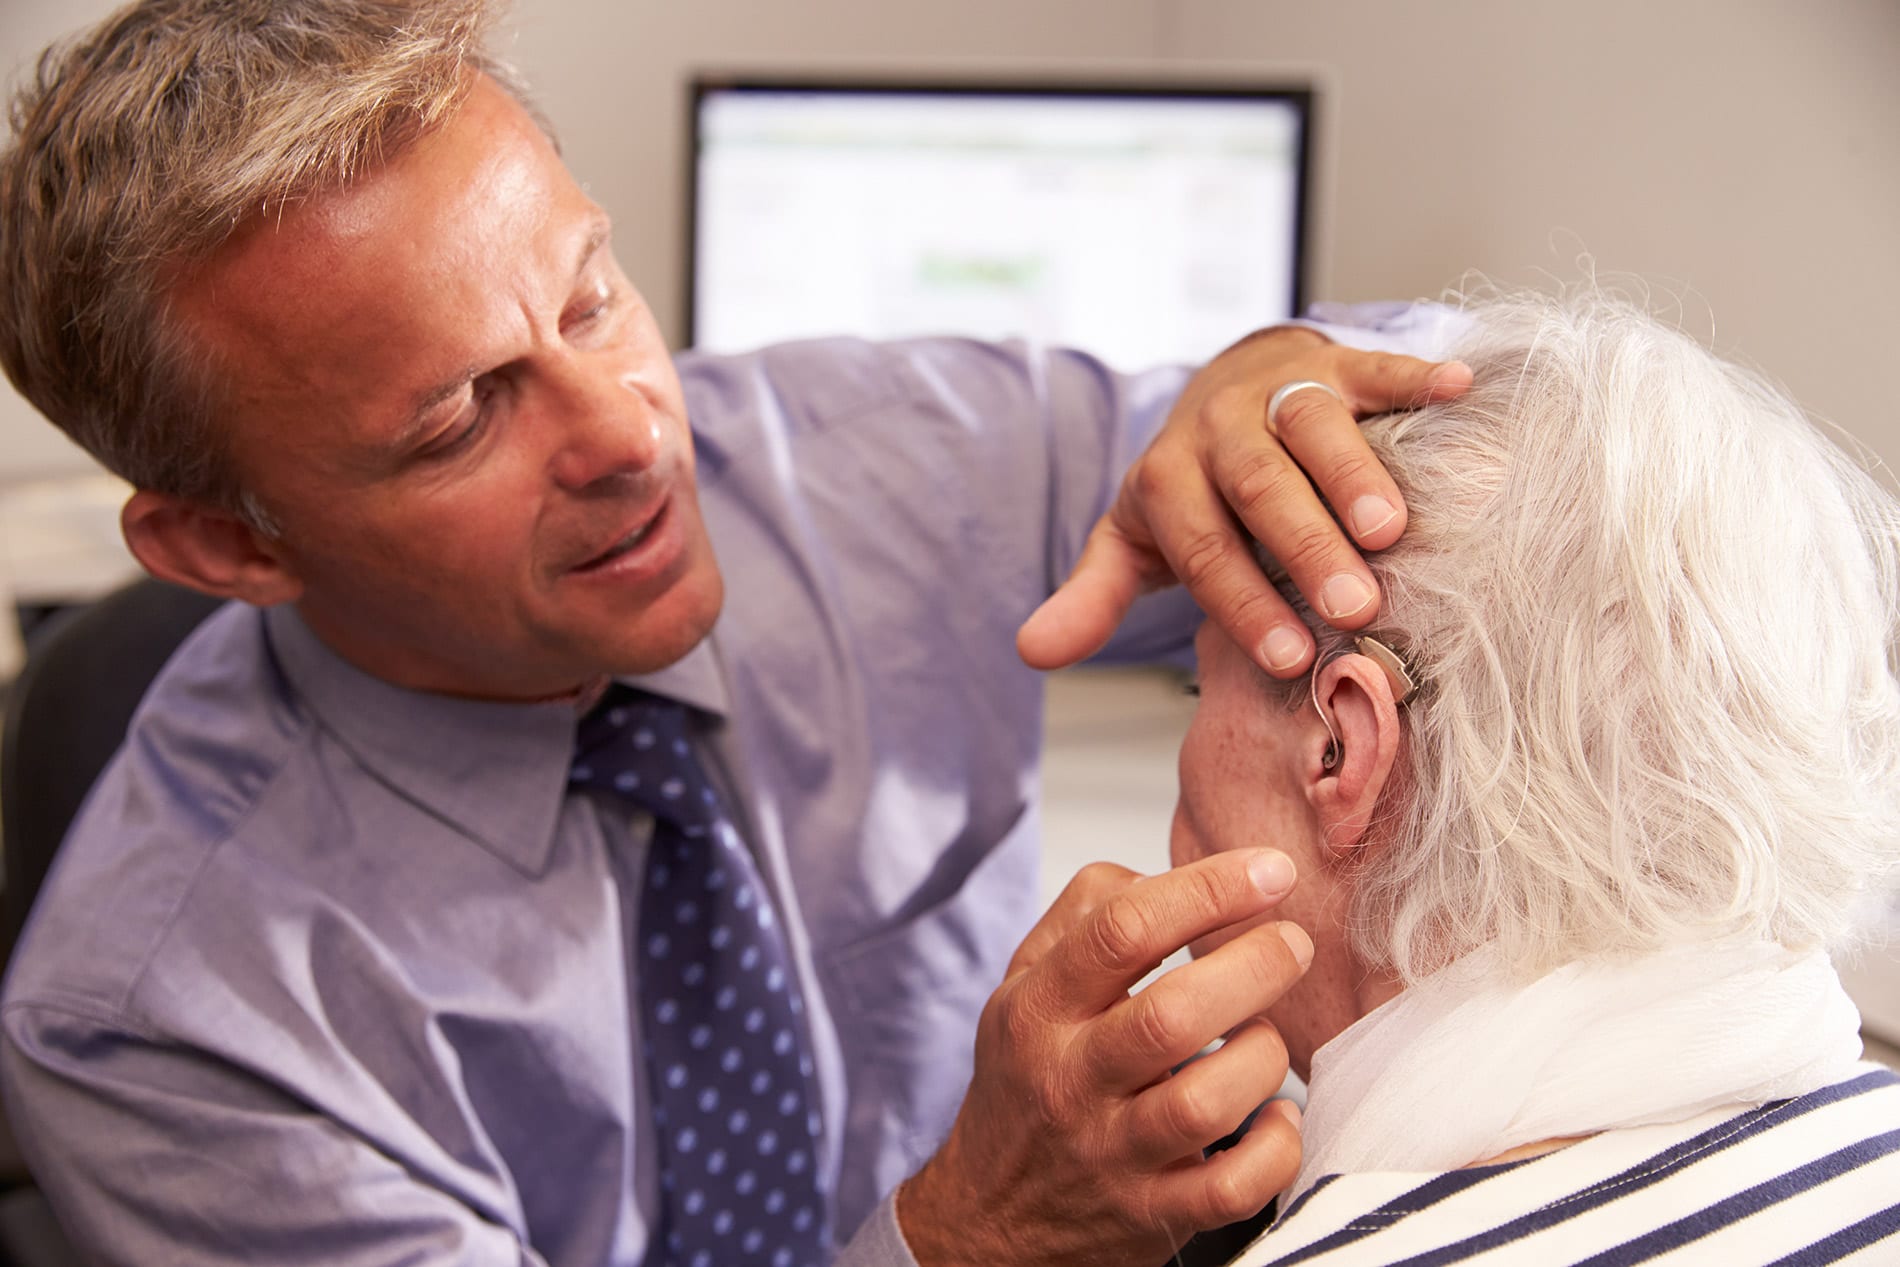 A professional helping a patient test a hearing device